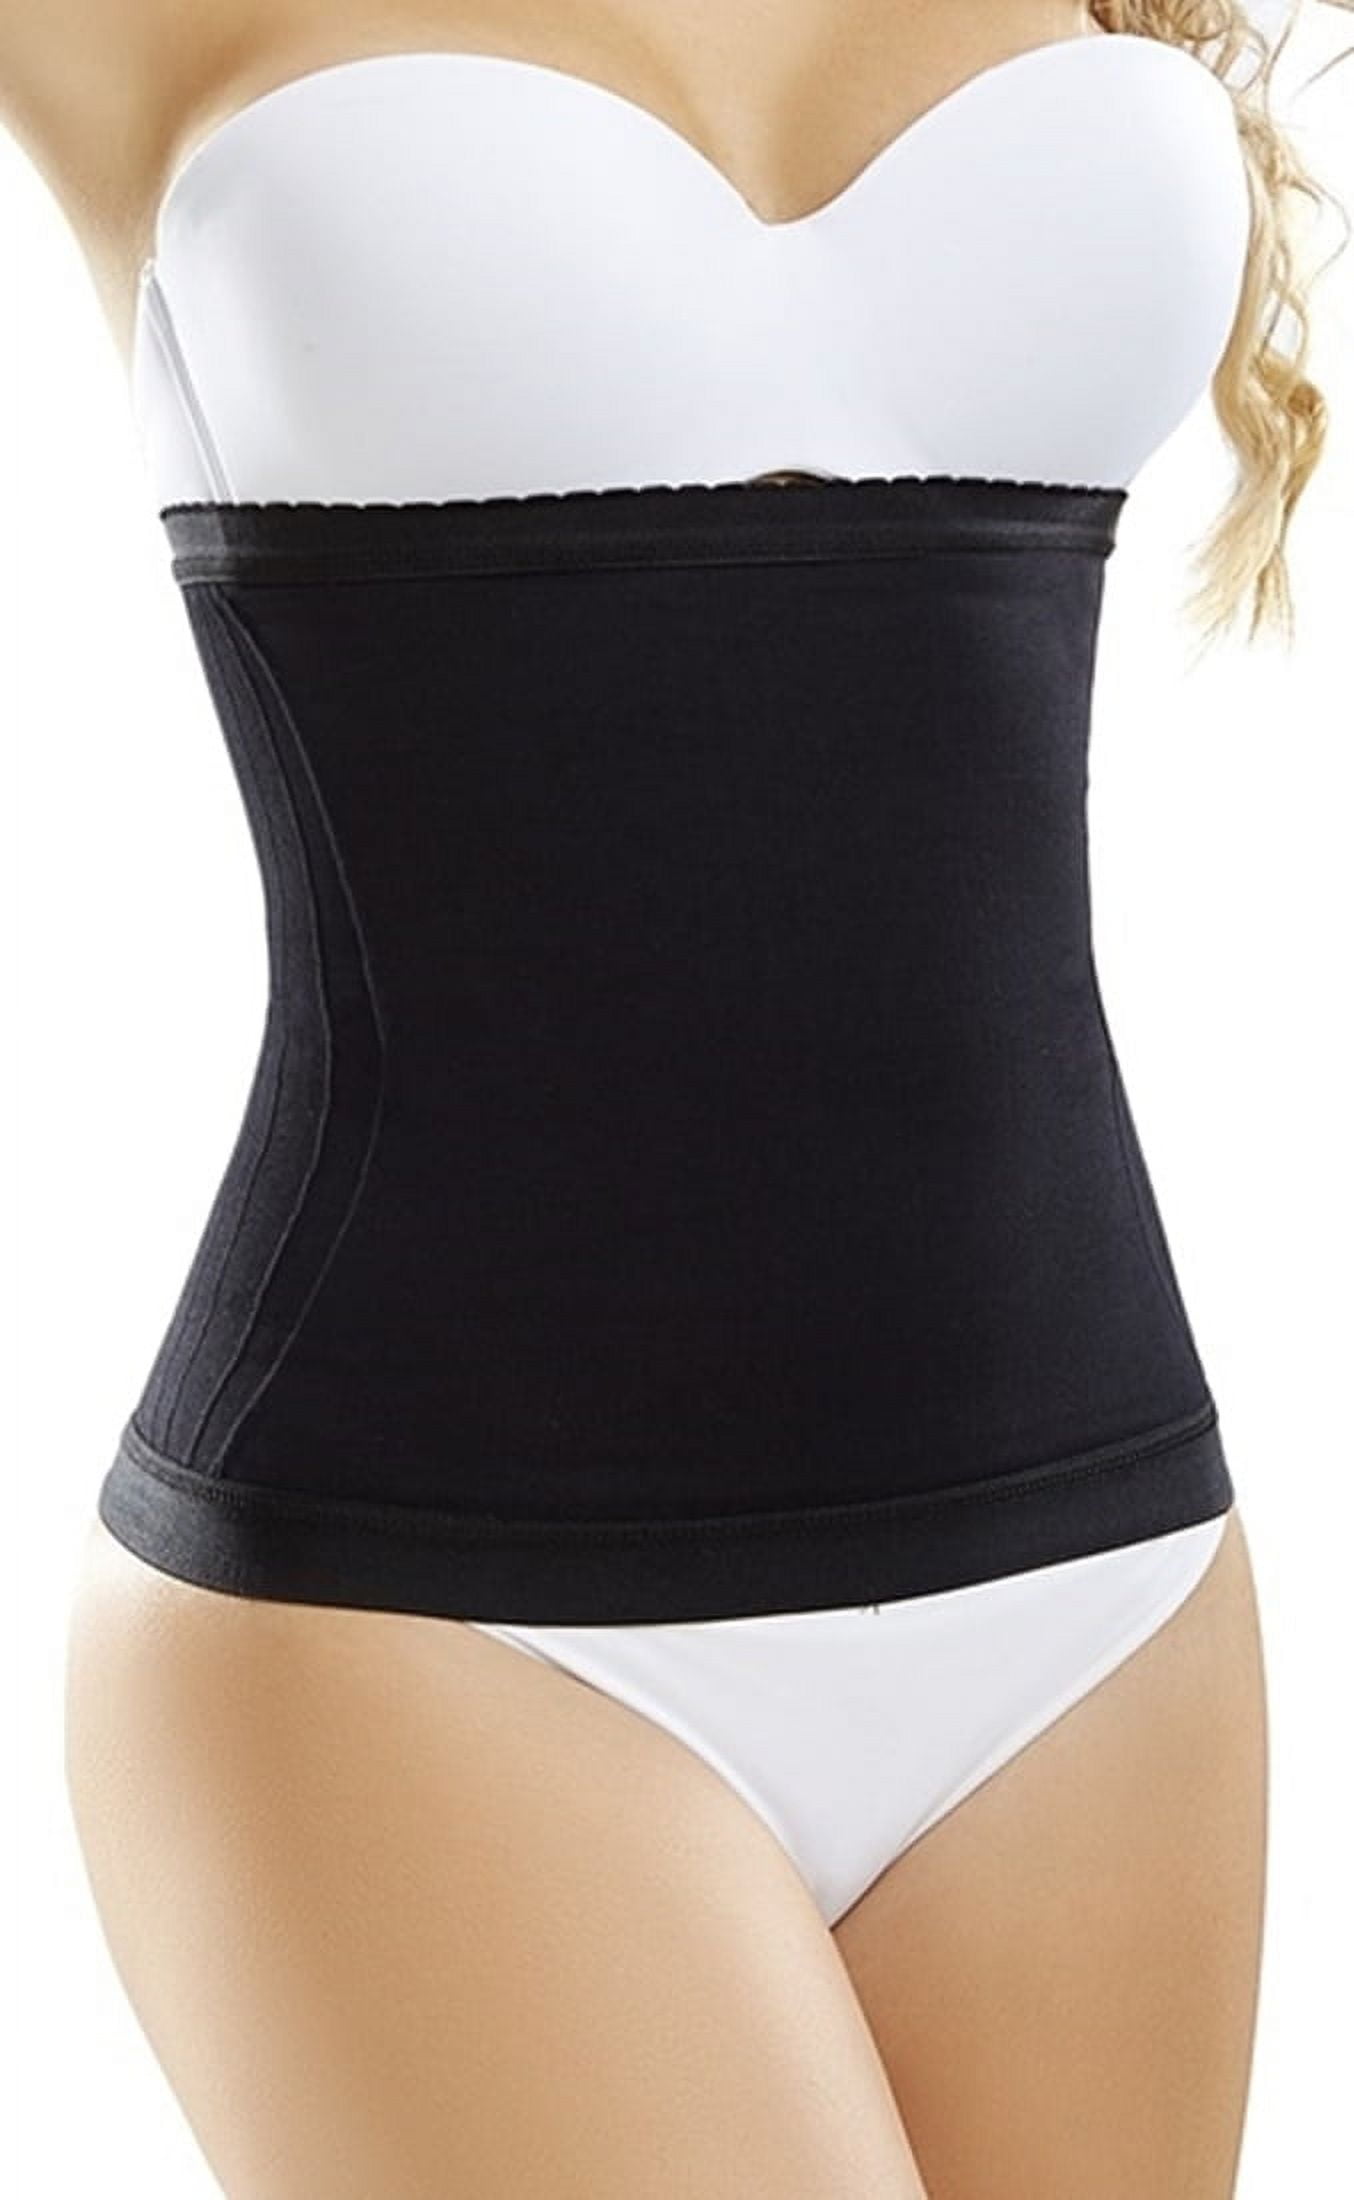 Girdle Shapewear Bodysuit-Faja Colombiana Fresh and Light Fajas Colombianas  para Adelgazar y Reducir body briefer for women Semaless No zippers, no  hooks, no straps Silicone Band Sculpts your Torso L 